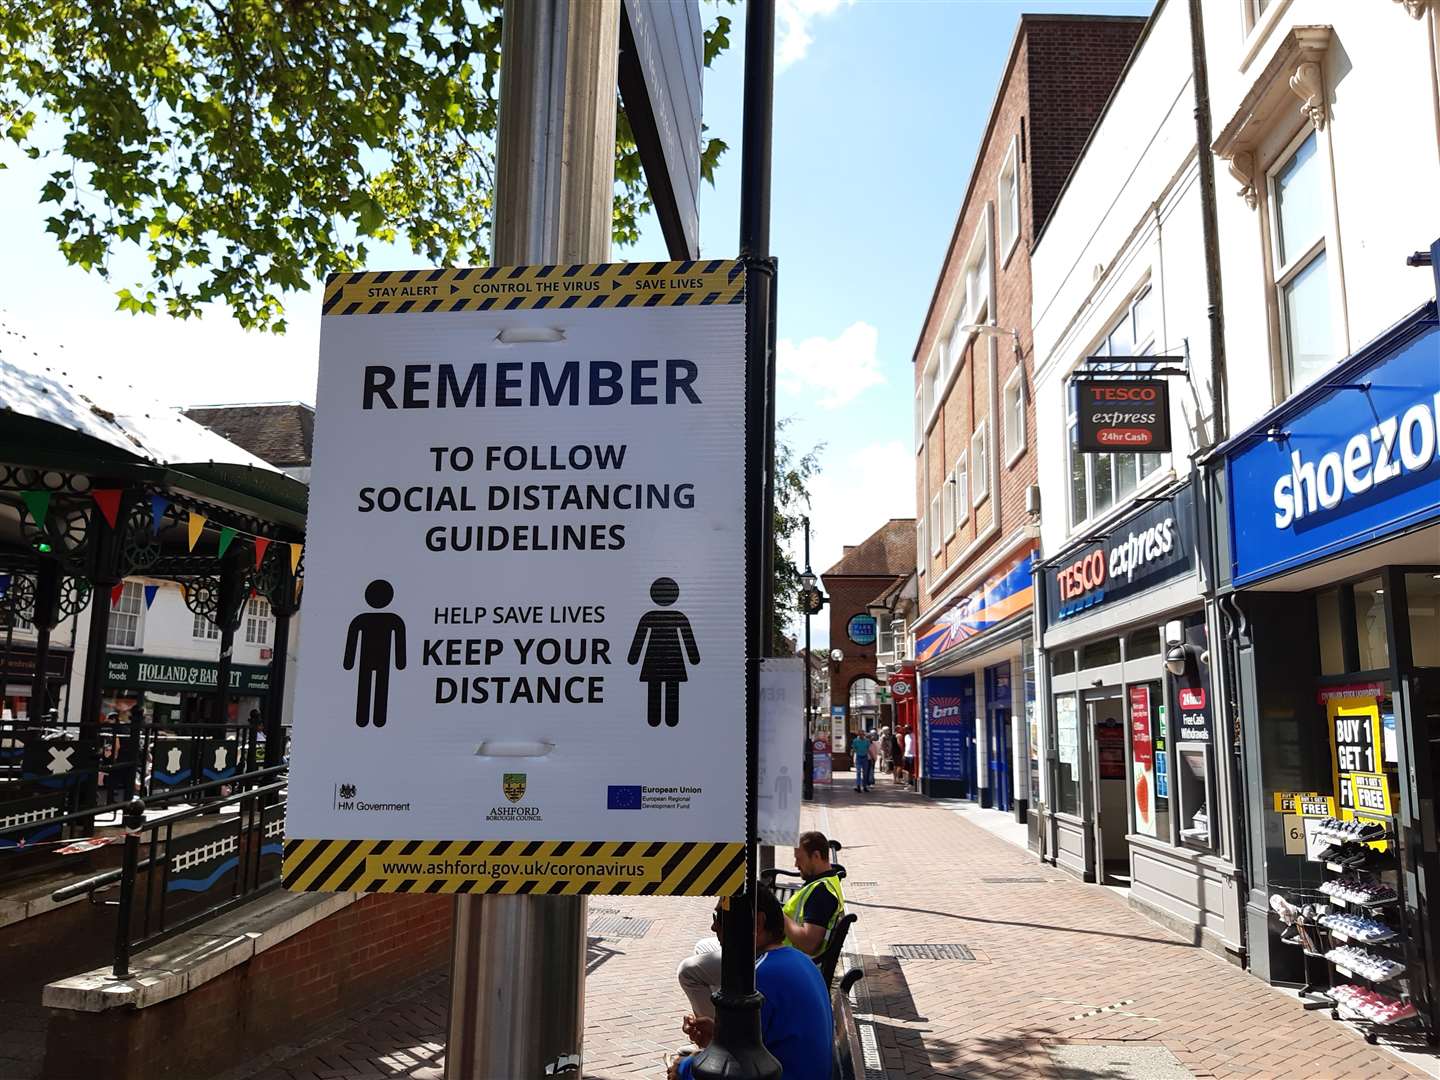 Signs to remind shoppers of the need for social distancing were a common sight on high streets like Ashford.